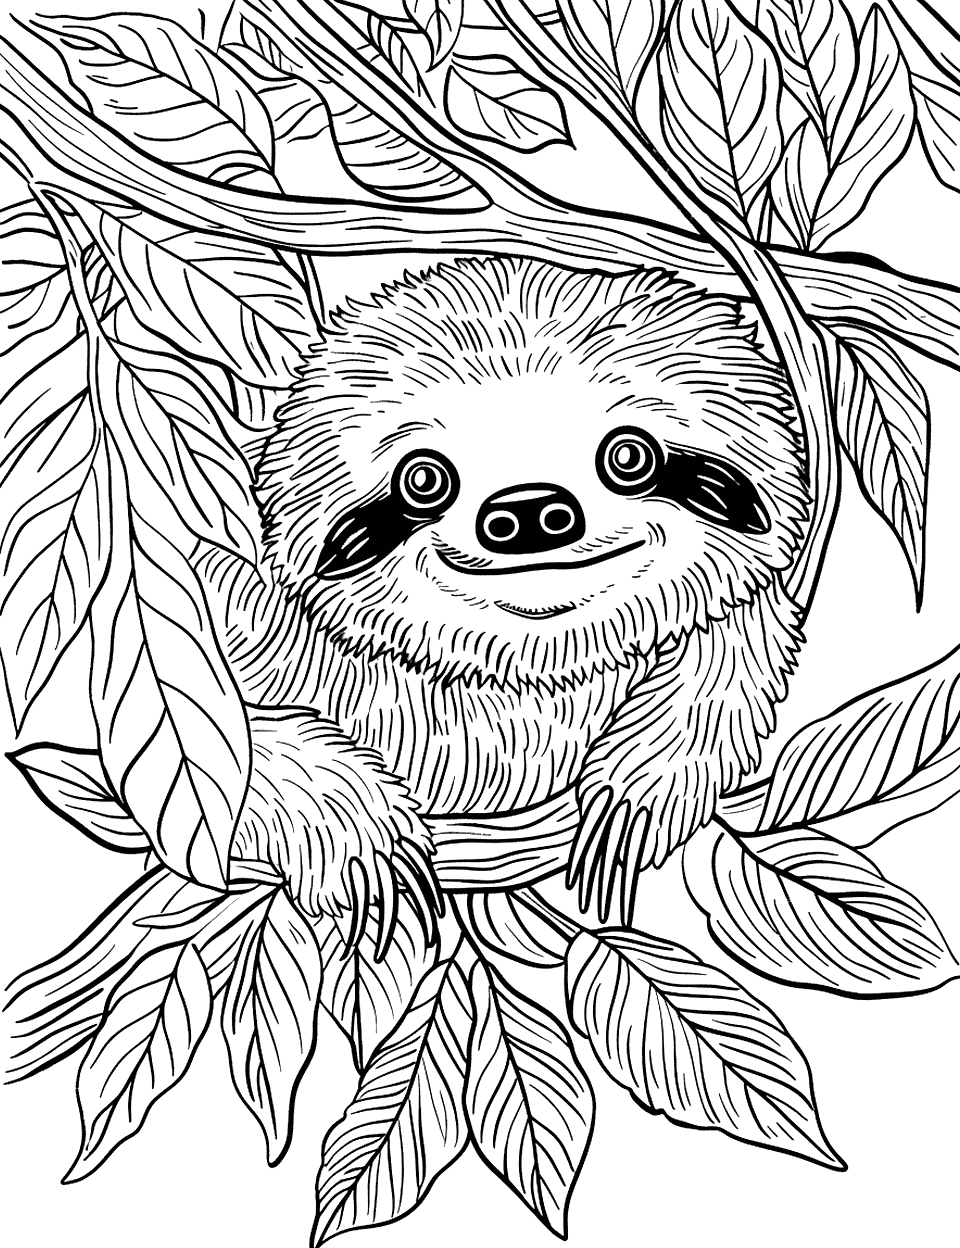 Curious Sloth Peeking Through Leaves Coloring Page - A sloth peeking curiously through a small gap in the leaves, eyes bright and wide.